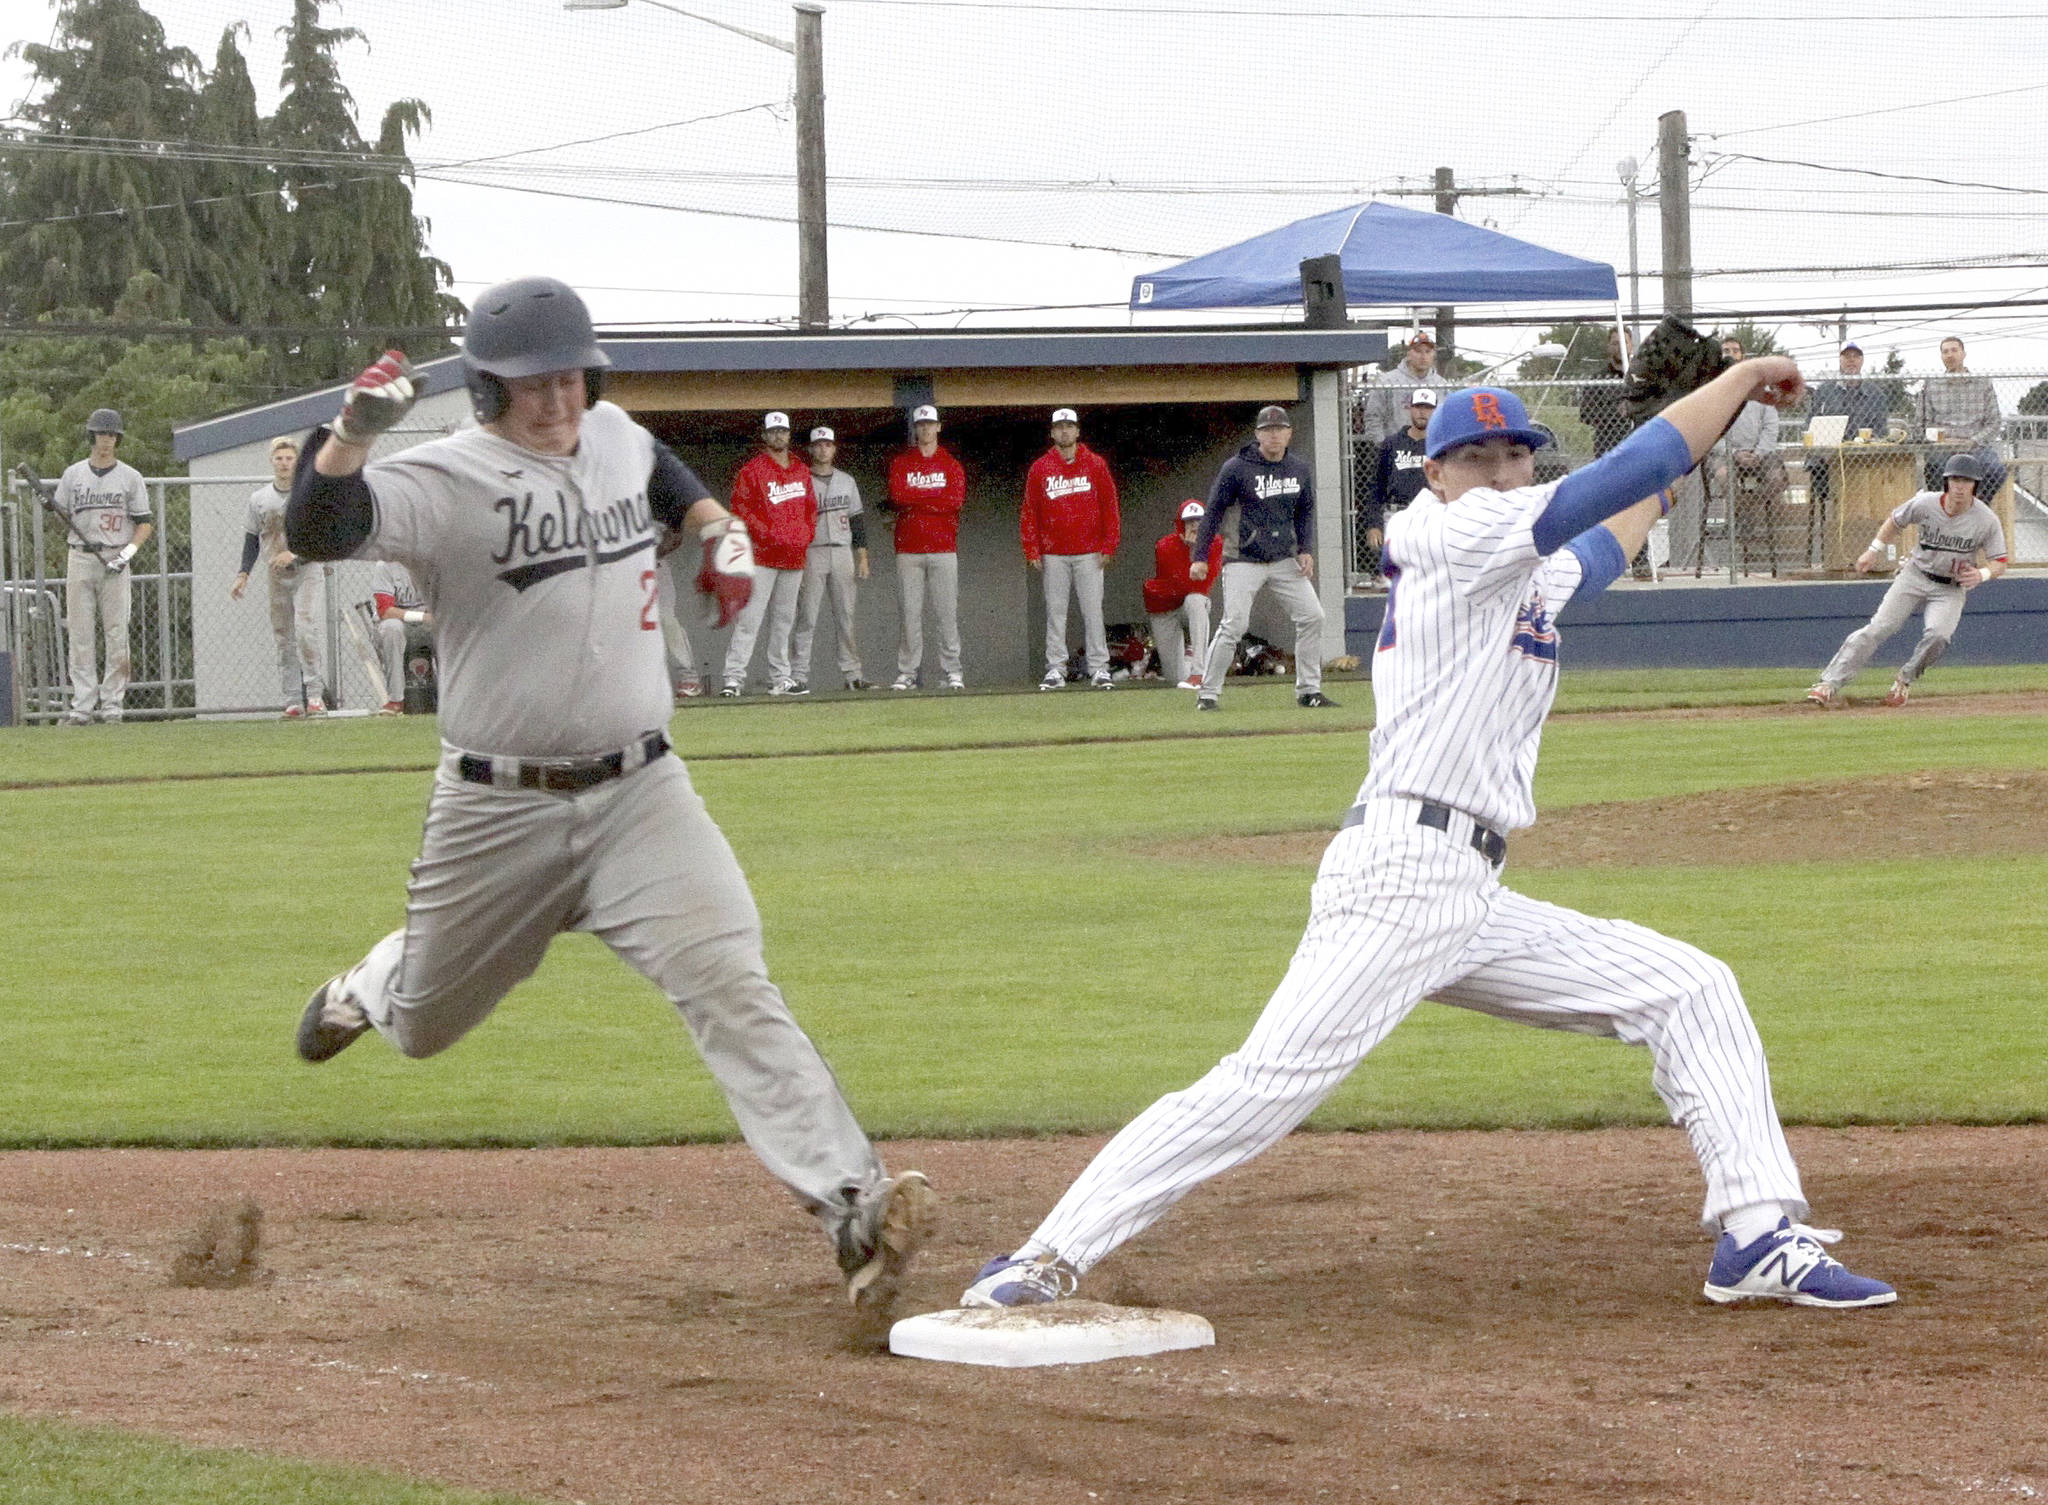 Dave Logan/for Peninsula Daily News                                Port Angeles Lefties pitcher Drew Zmuda, right, covers first base as Kelowna’s Bo Meikljohn reaches for the base. Meikljohn was called out but the Falcons picked up a three-game sweep of the Lefties.